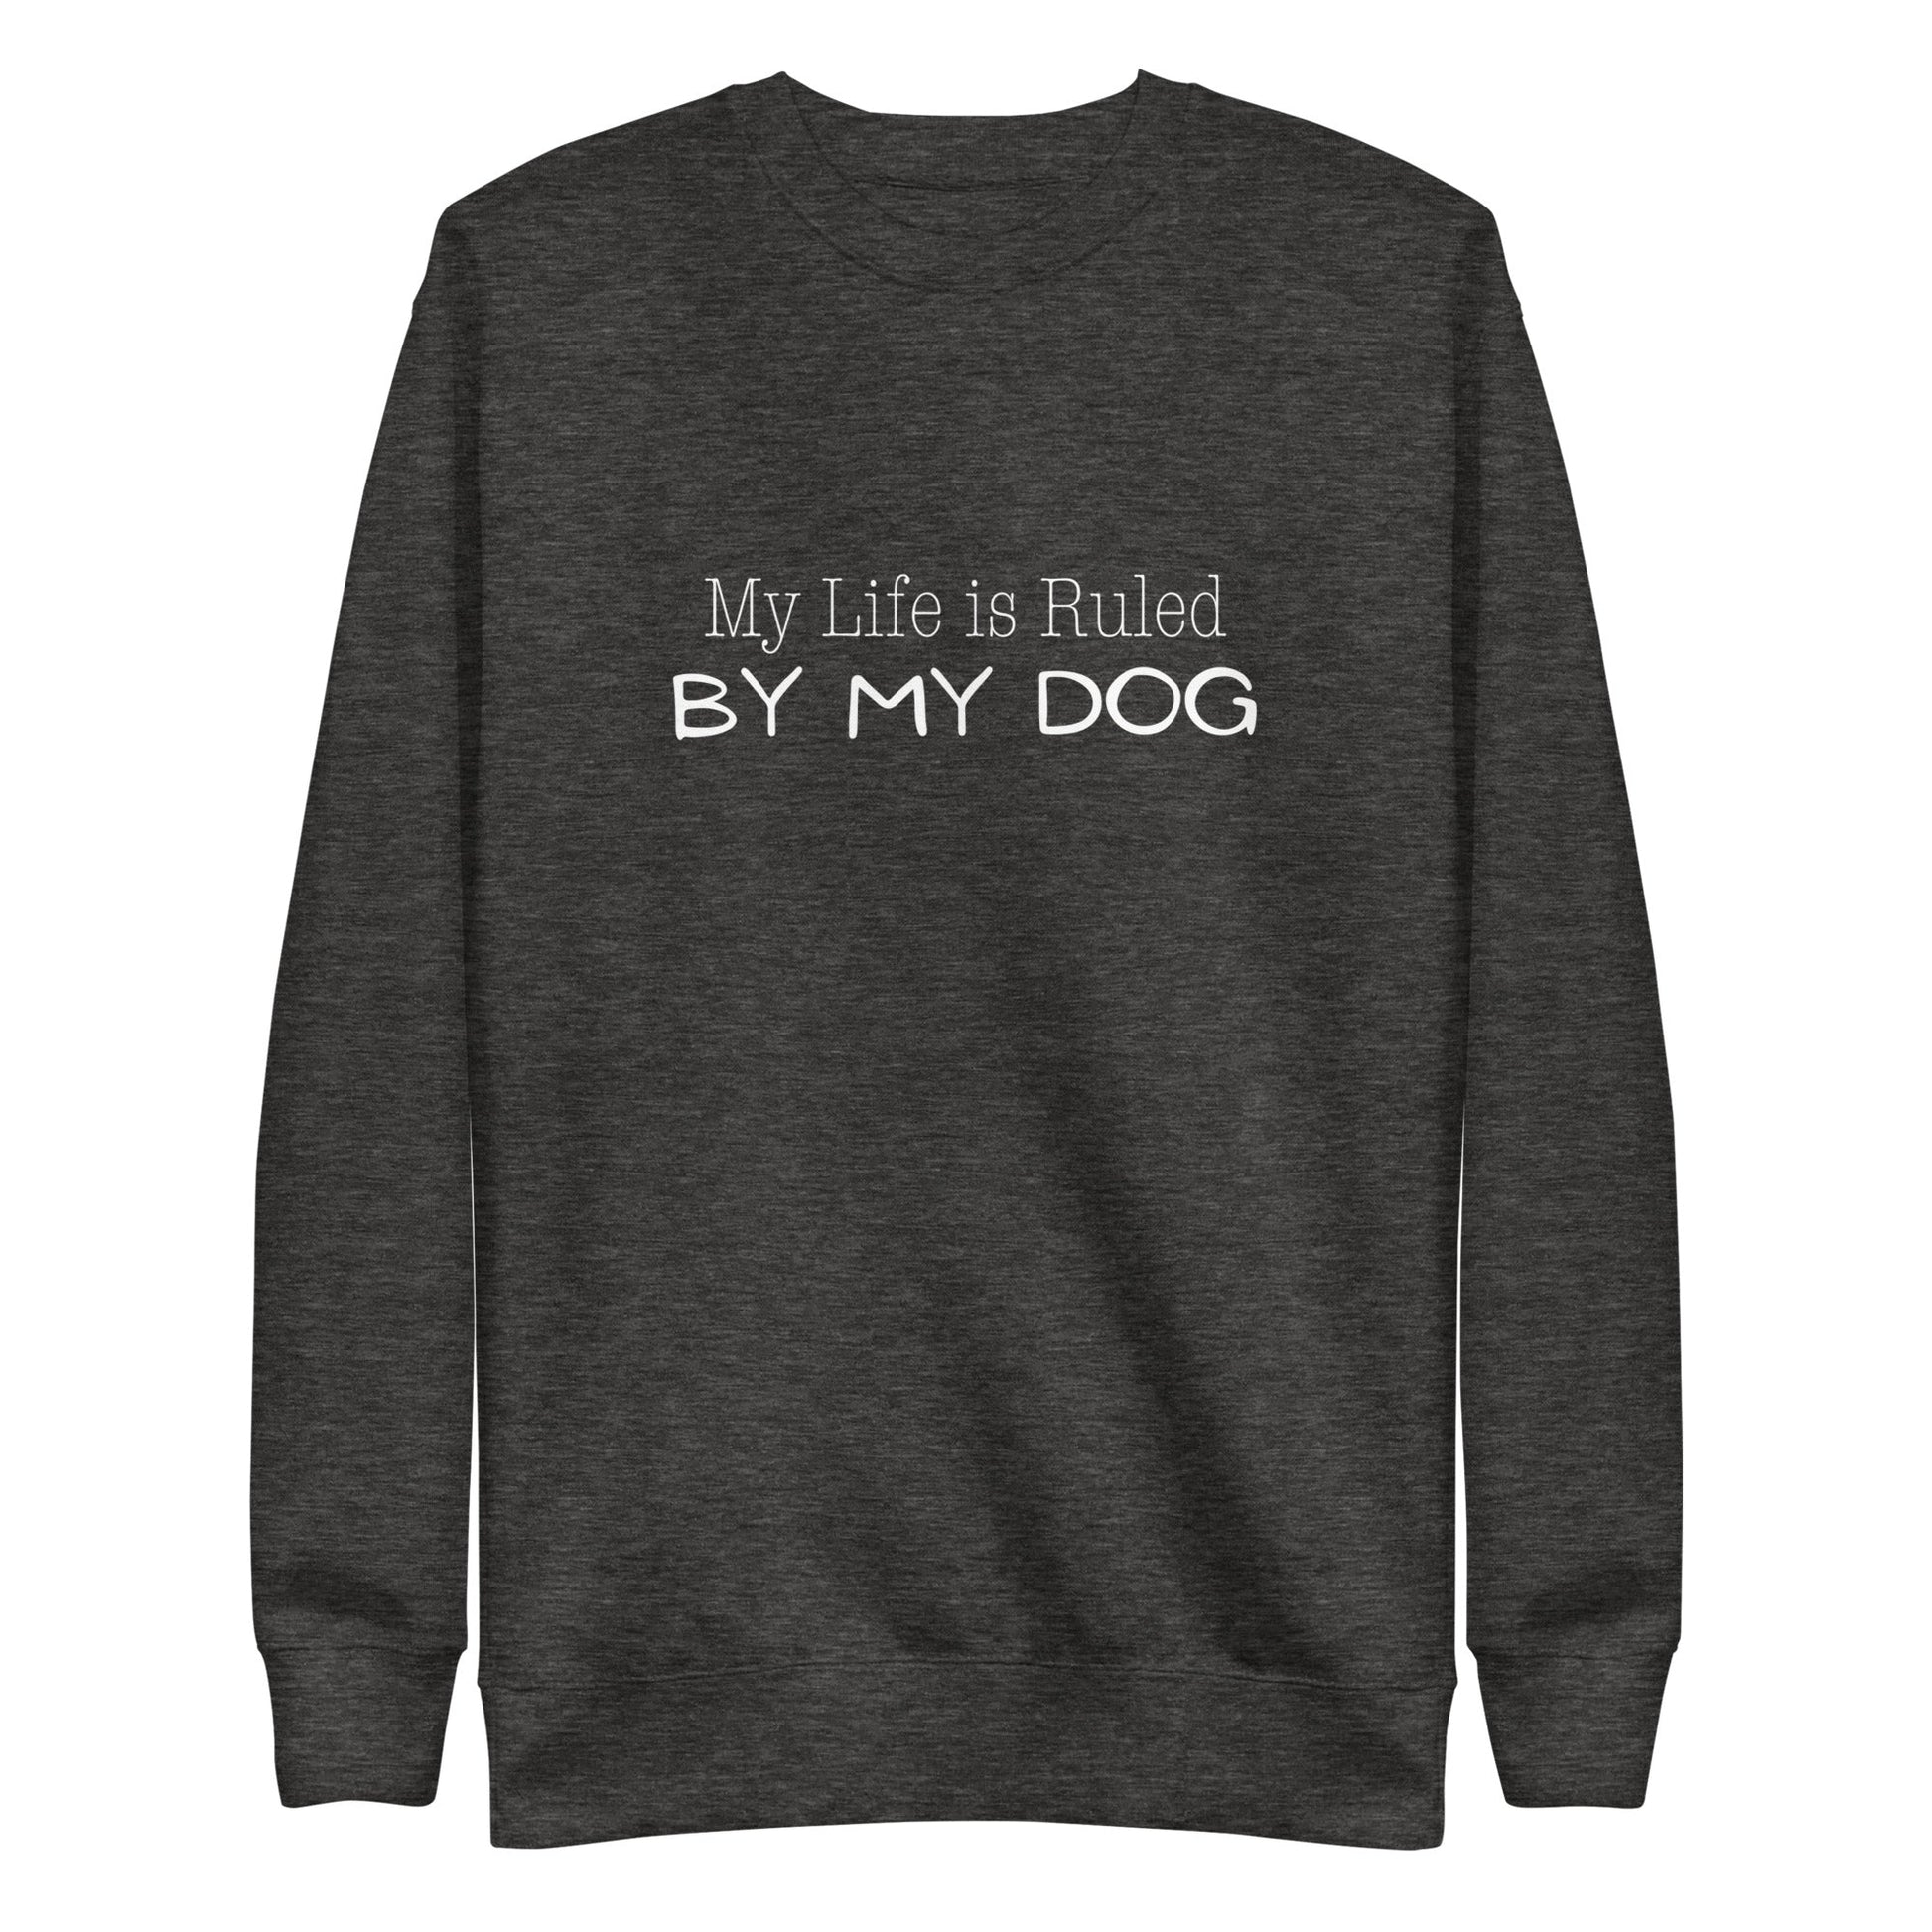 My Life is Ruled by Dog Sweatshirt - Charcoal Heather / S